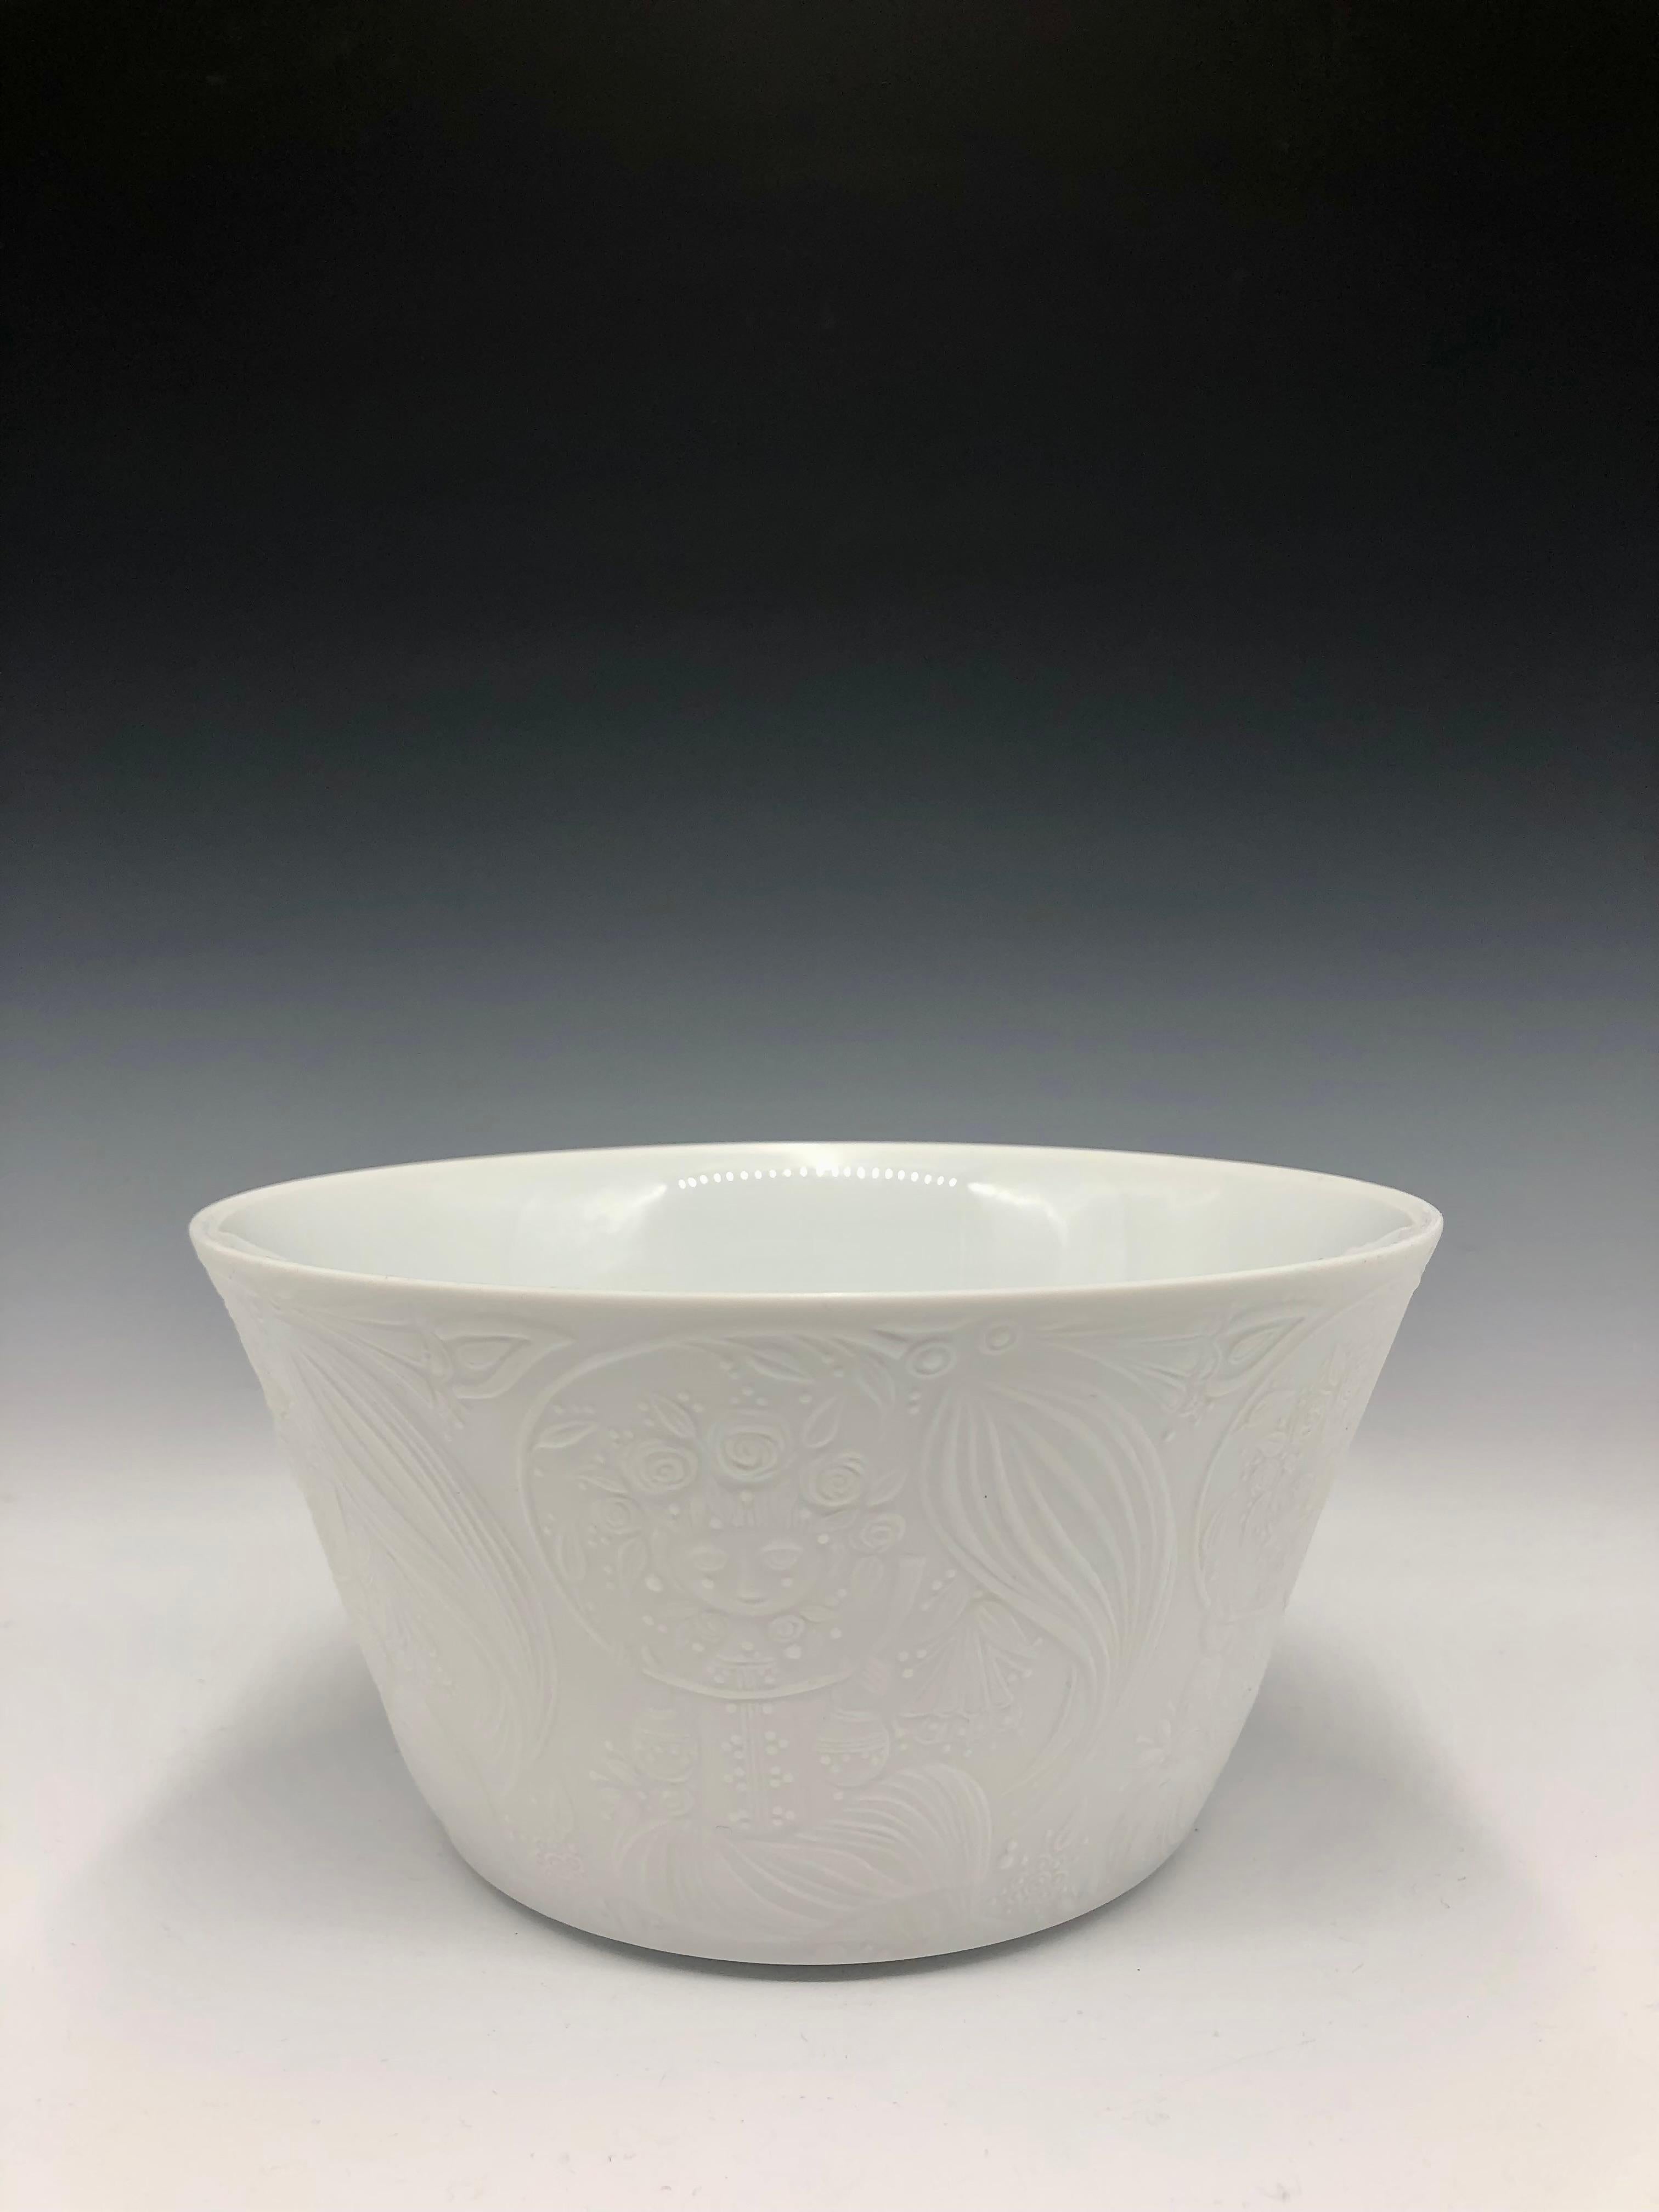 A beautiful white matte porcelain bisque bowl with figurative exterior relief and a plain white glossy interior from the 1960s by Danish designer Bjorn Wiinblad for Rosenthal Studio-Linie produced in Munich, Germany,  

Markings include the original